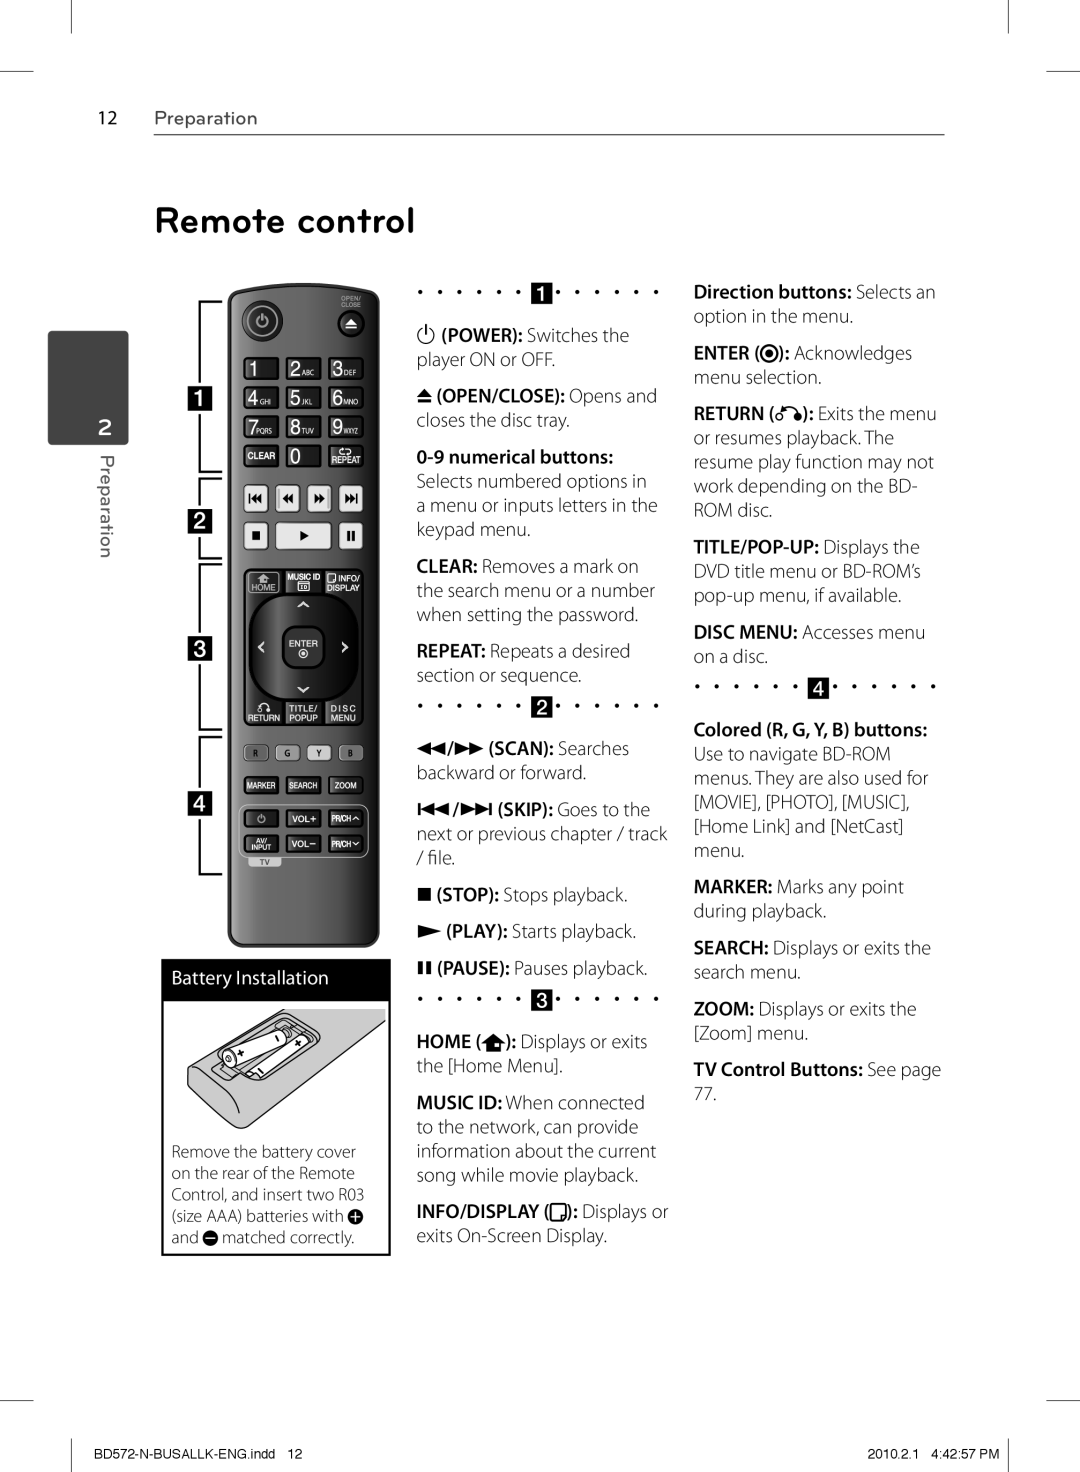 LG Electronics BD570 owner manual Remote control, Preparation, Battery Installation 